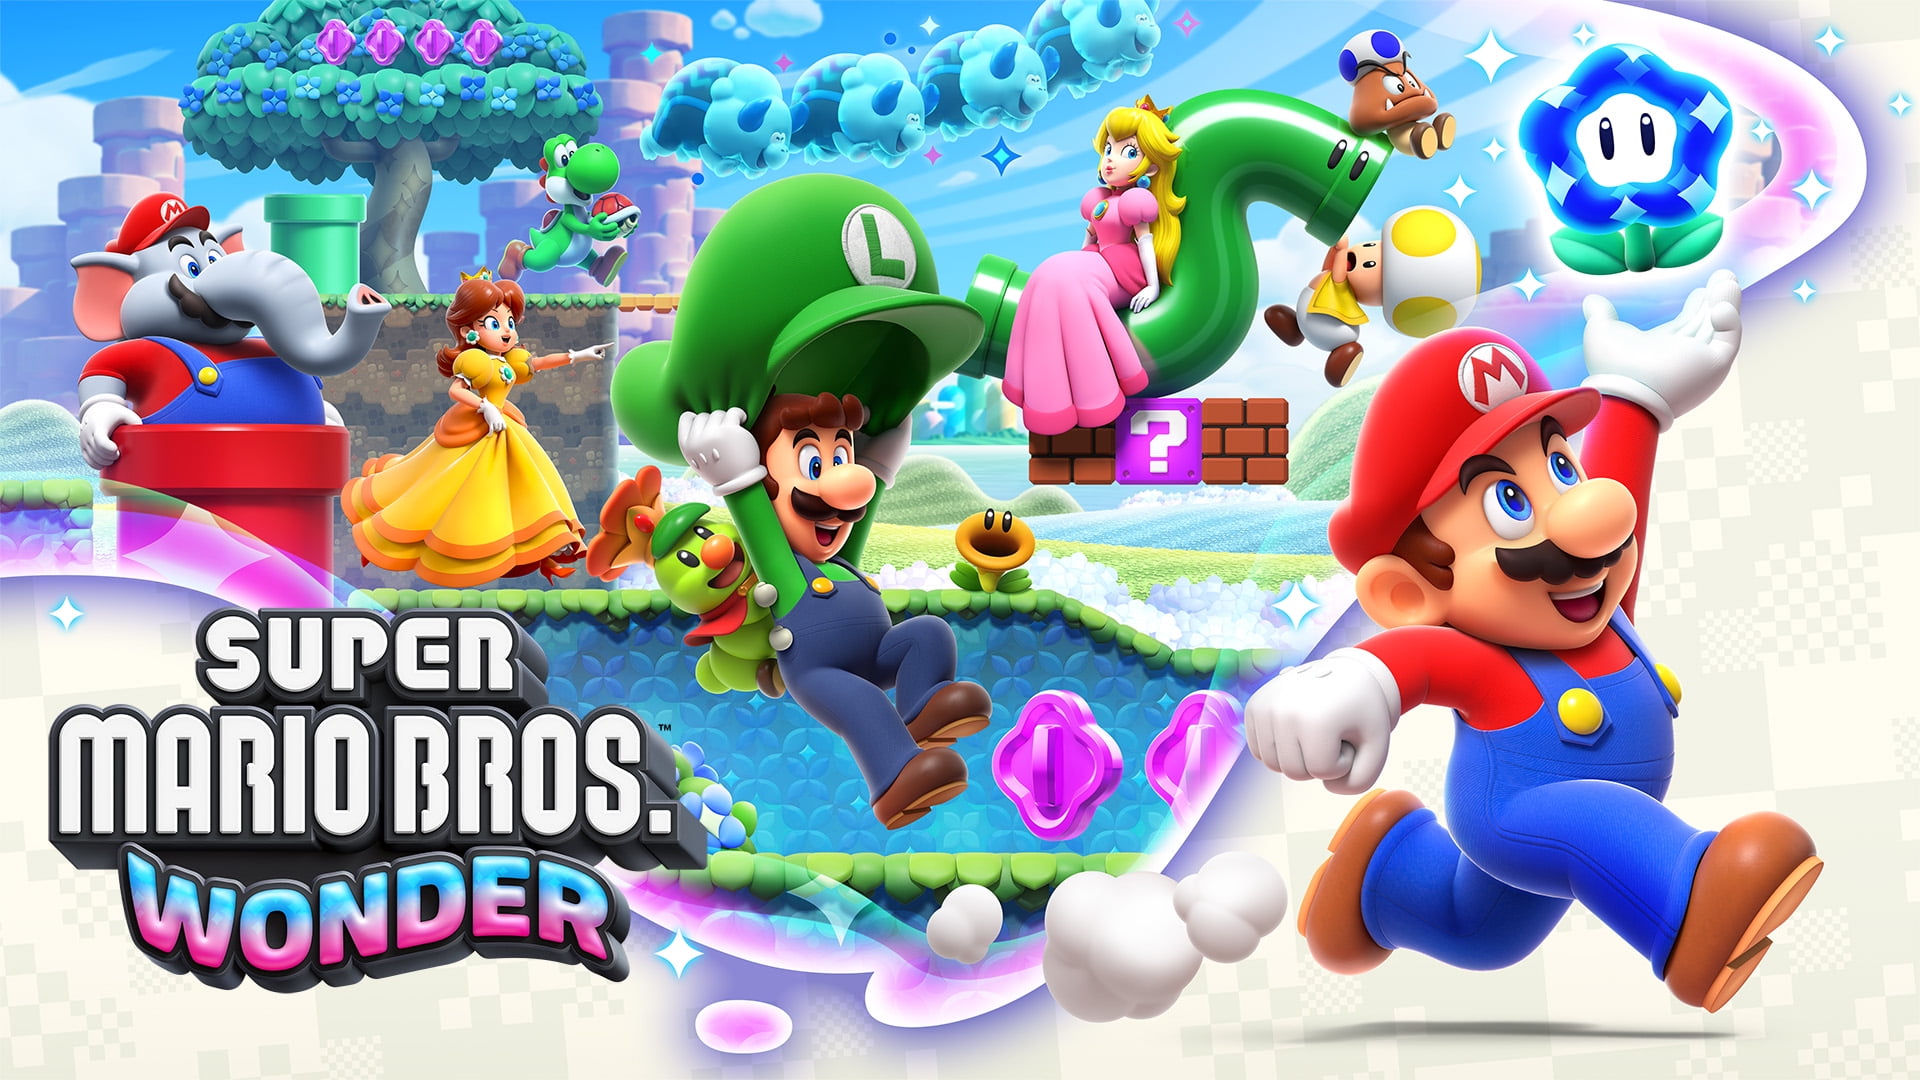 Get Super Mario Bros Wonder free with this 3 for 2 offer at Best